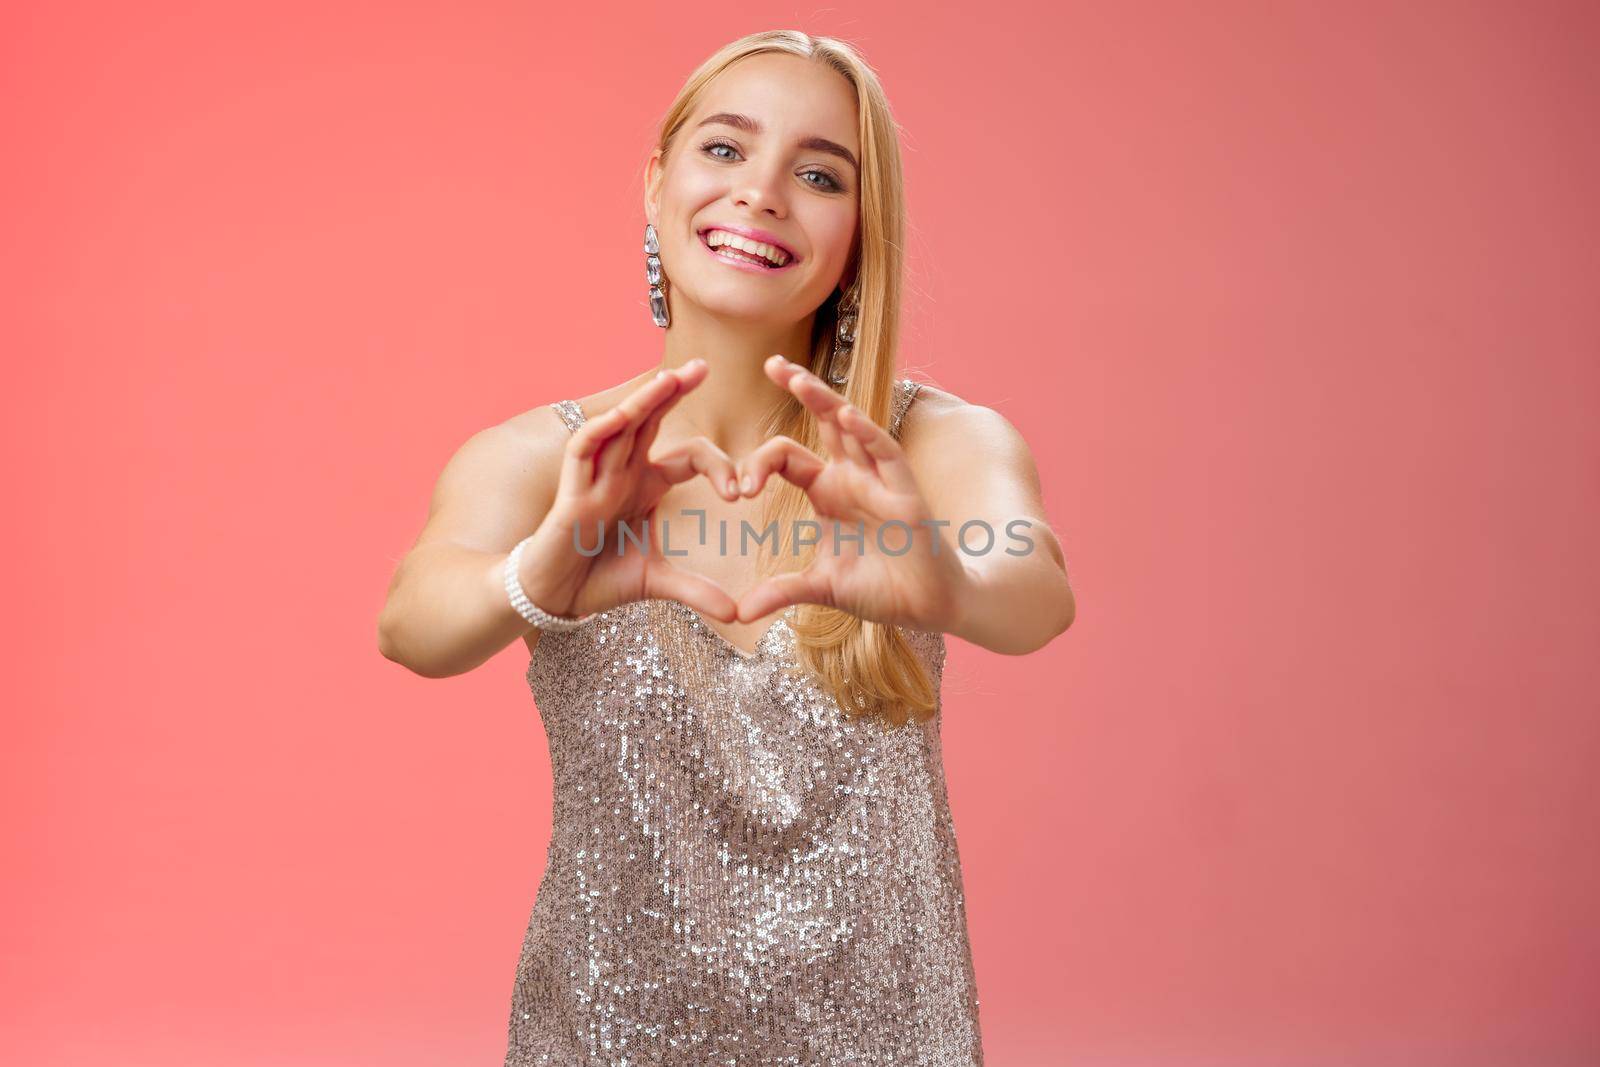 Girl confess she loves you. Portrait charming tender feminine young glamour blond woman in silver stylish glittering dress extend arms camera show heart sign smiling broadly, adore girlfriend.